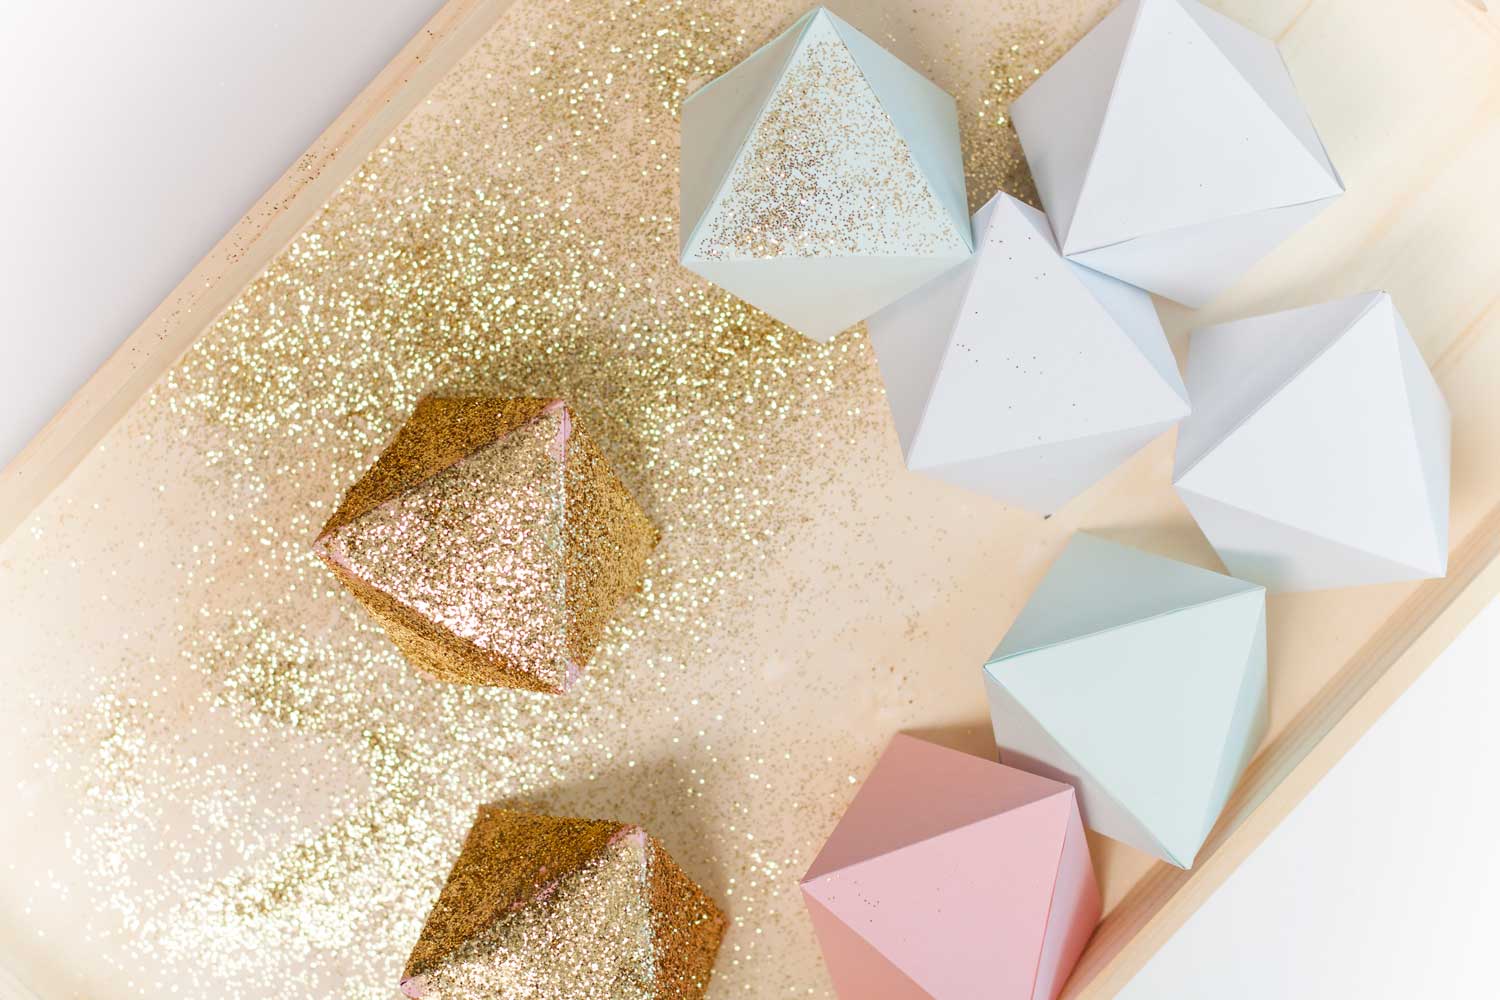 Treat your inner math nerd to some craft time. This DIY Glitter Octahedron Garland is quick and easy to make while also adding some sparkle to your walls.